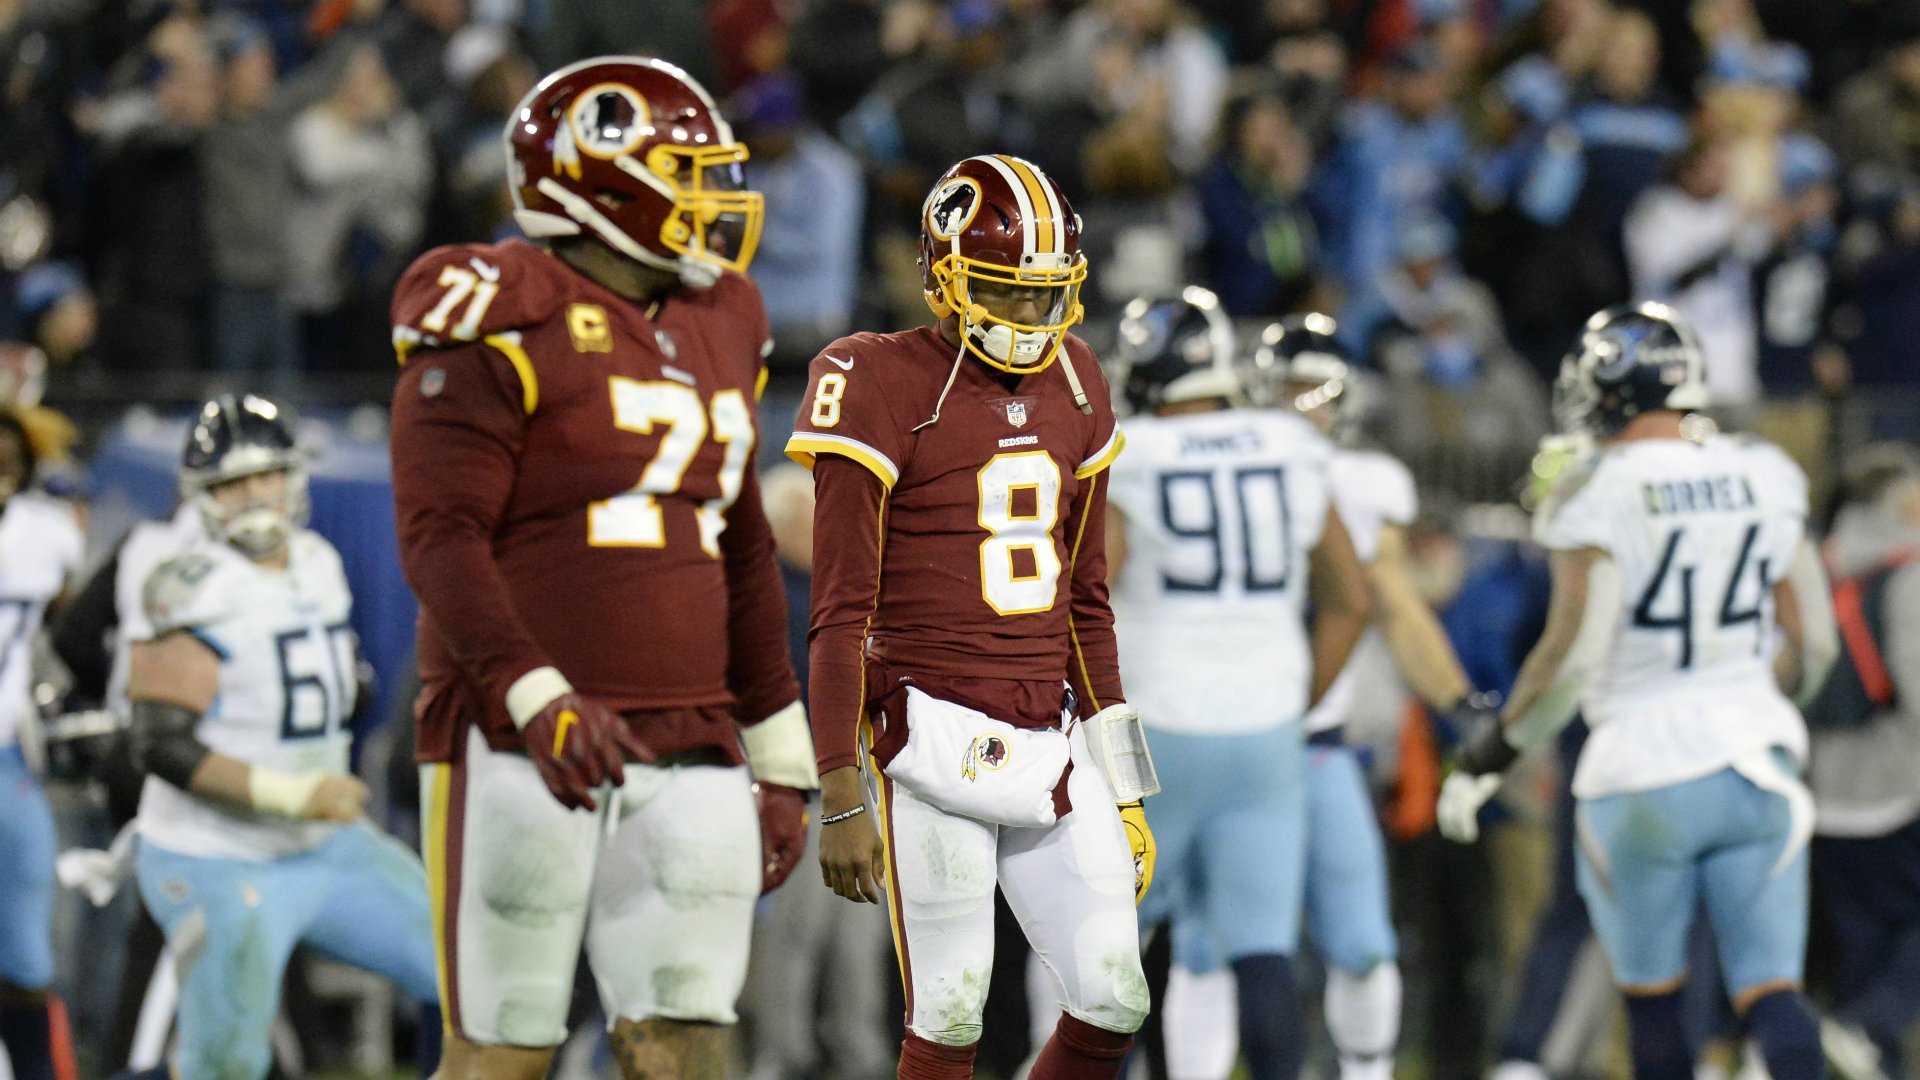  An Uphill Battle; Why The Redskins Are Always Low Ranked